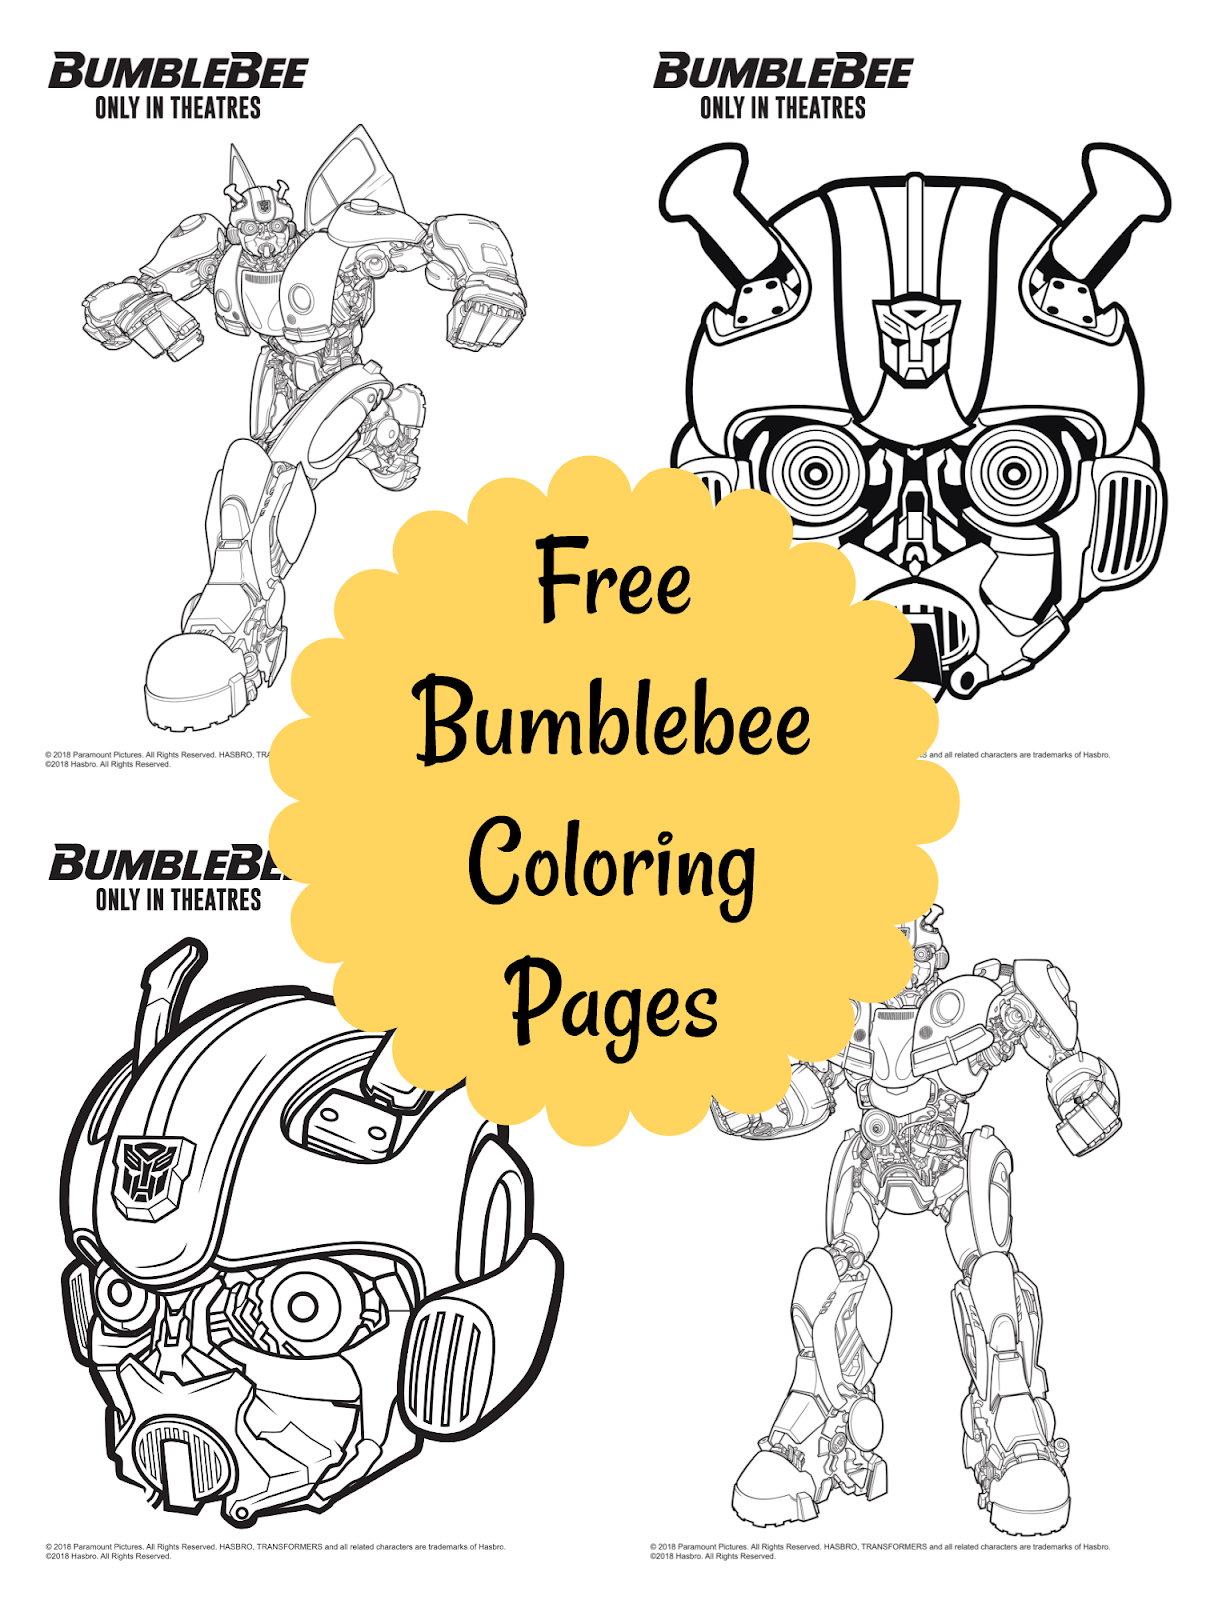 Entenmanns brings an unbeelieveable sweepstakes free printables giveaway transformers coloring pages coloring pages transformers birthday parties